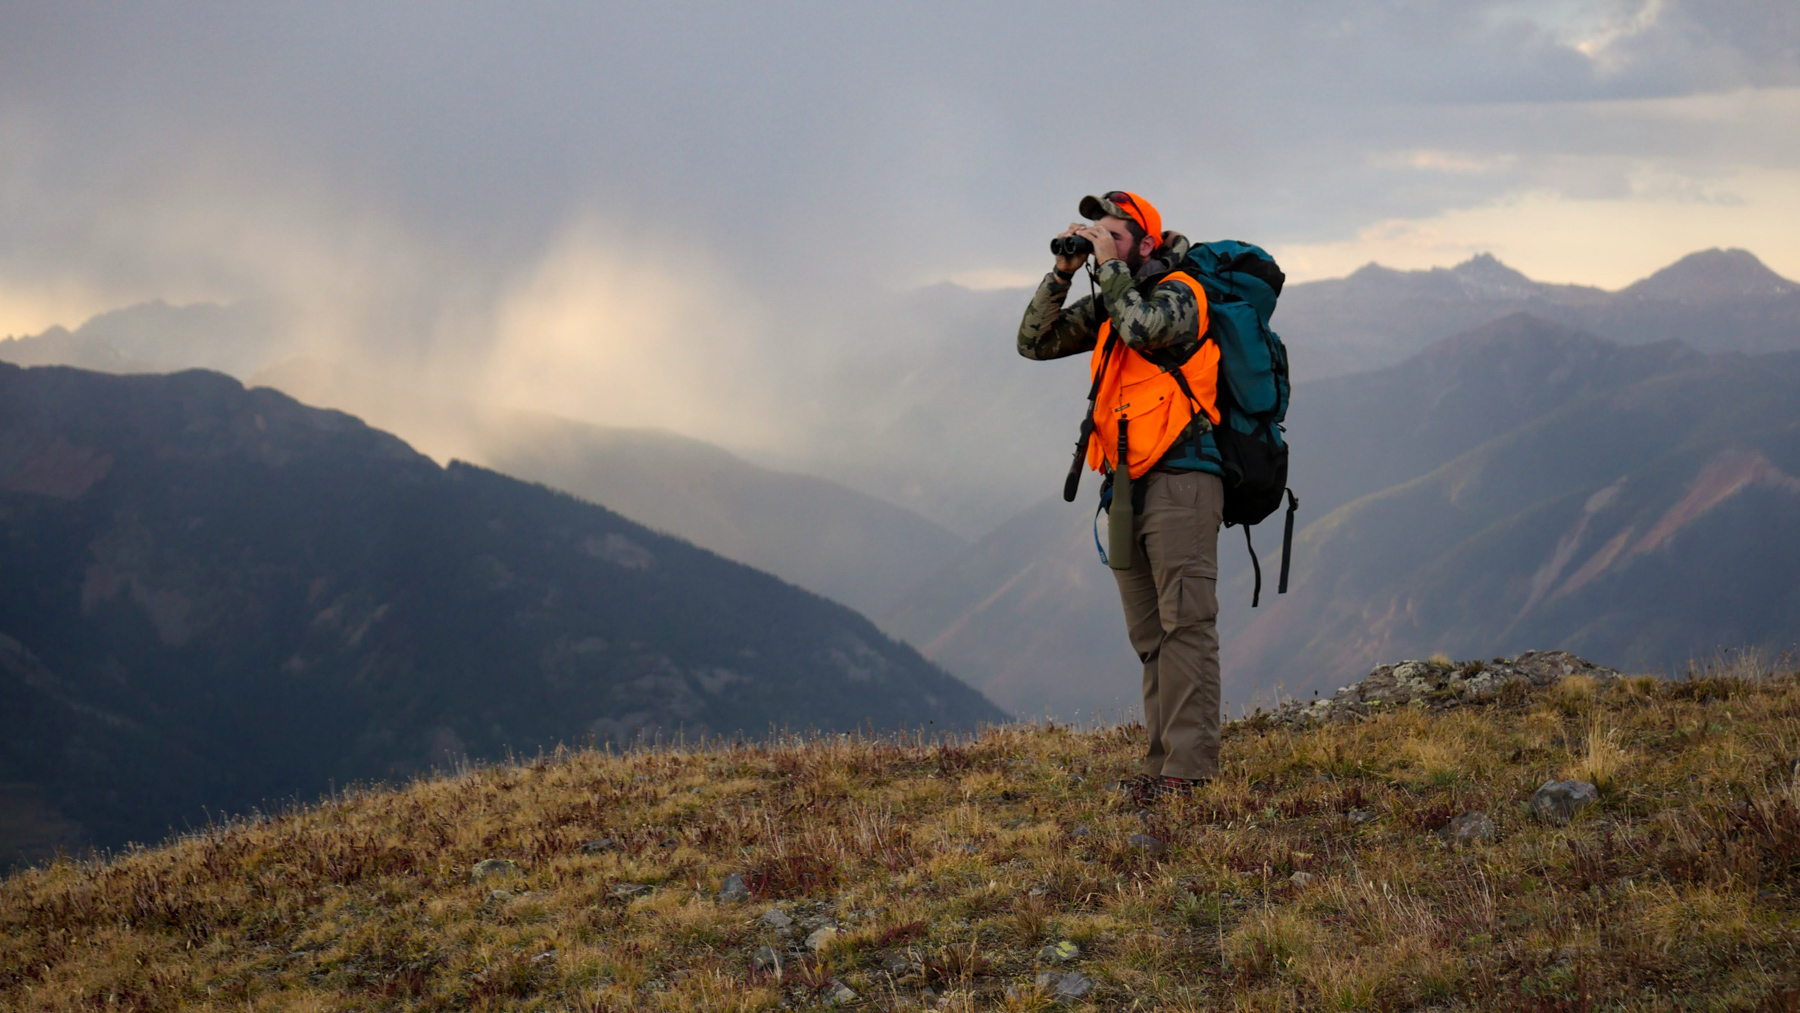 Restoring balance in the San Juan Mountains | The Wilderness Society